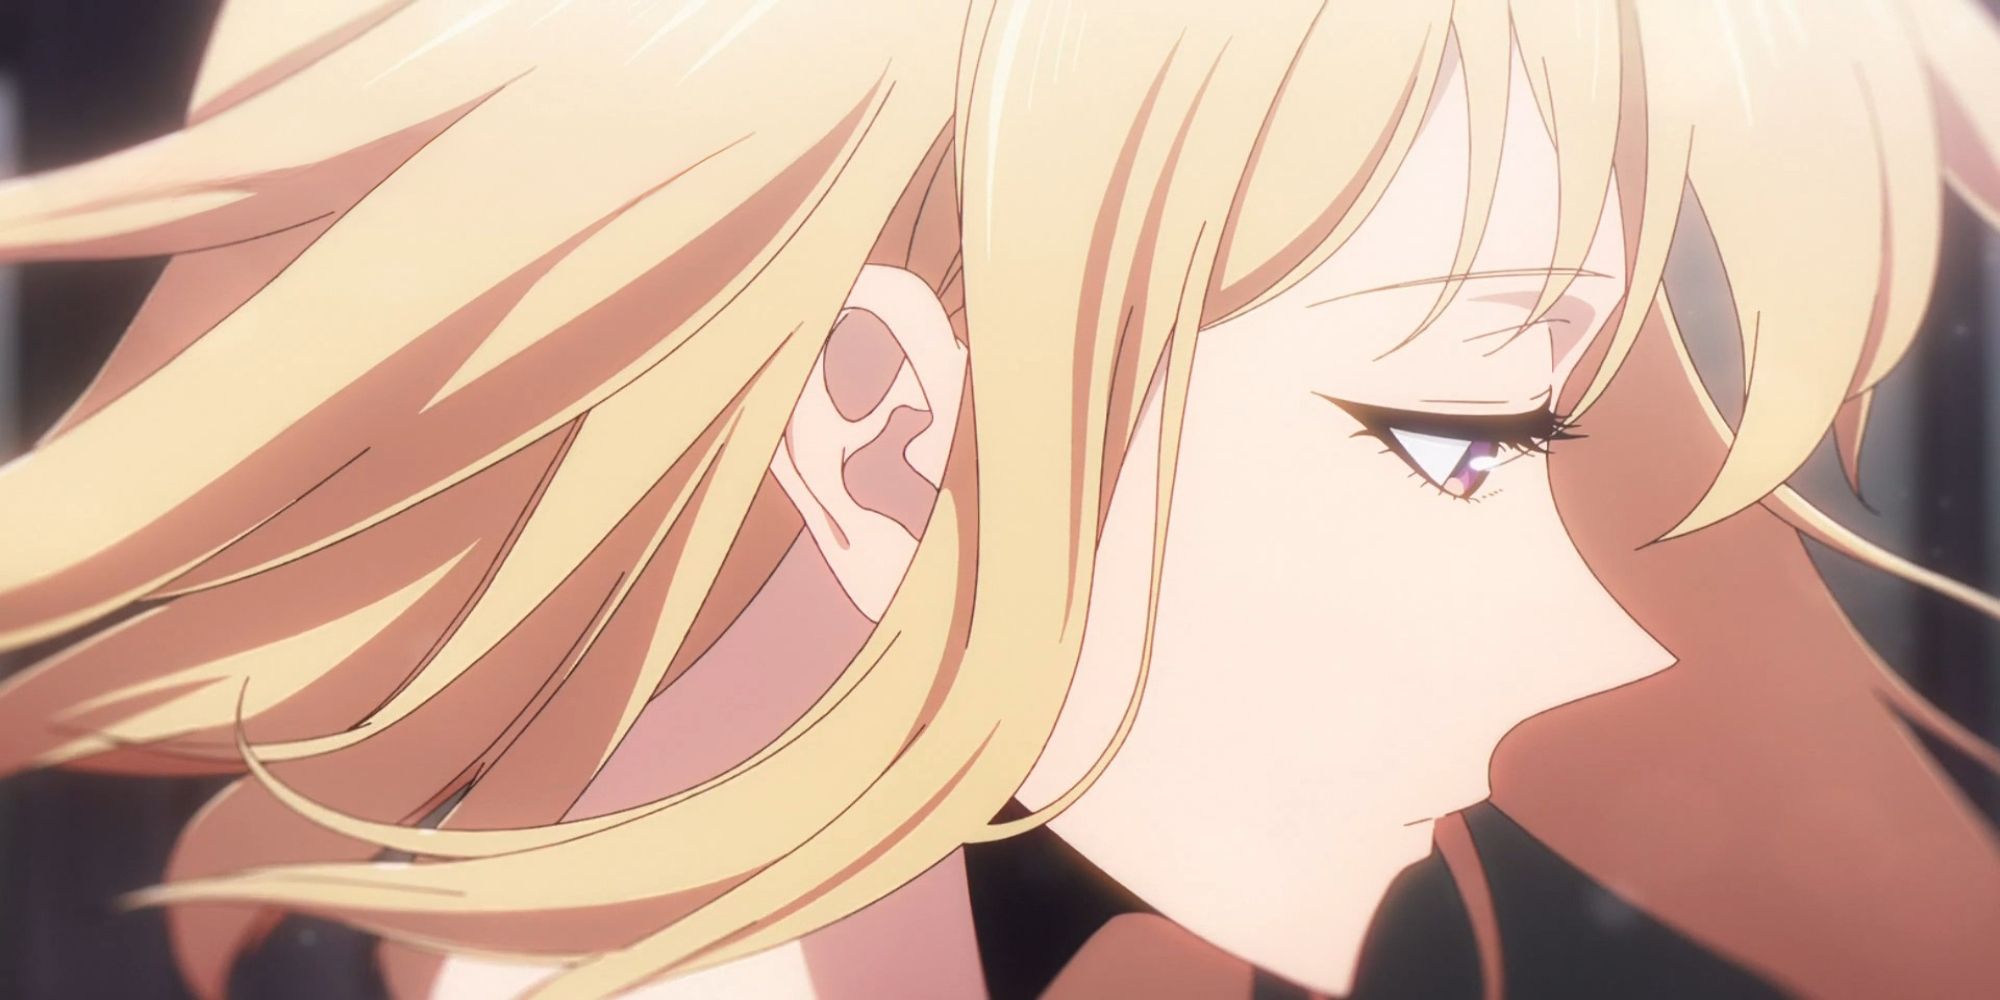 Solo Leveling Anime Episode 1 Review: a spectacular start reflects a  near-perfect adaptation of the Manhwa